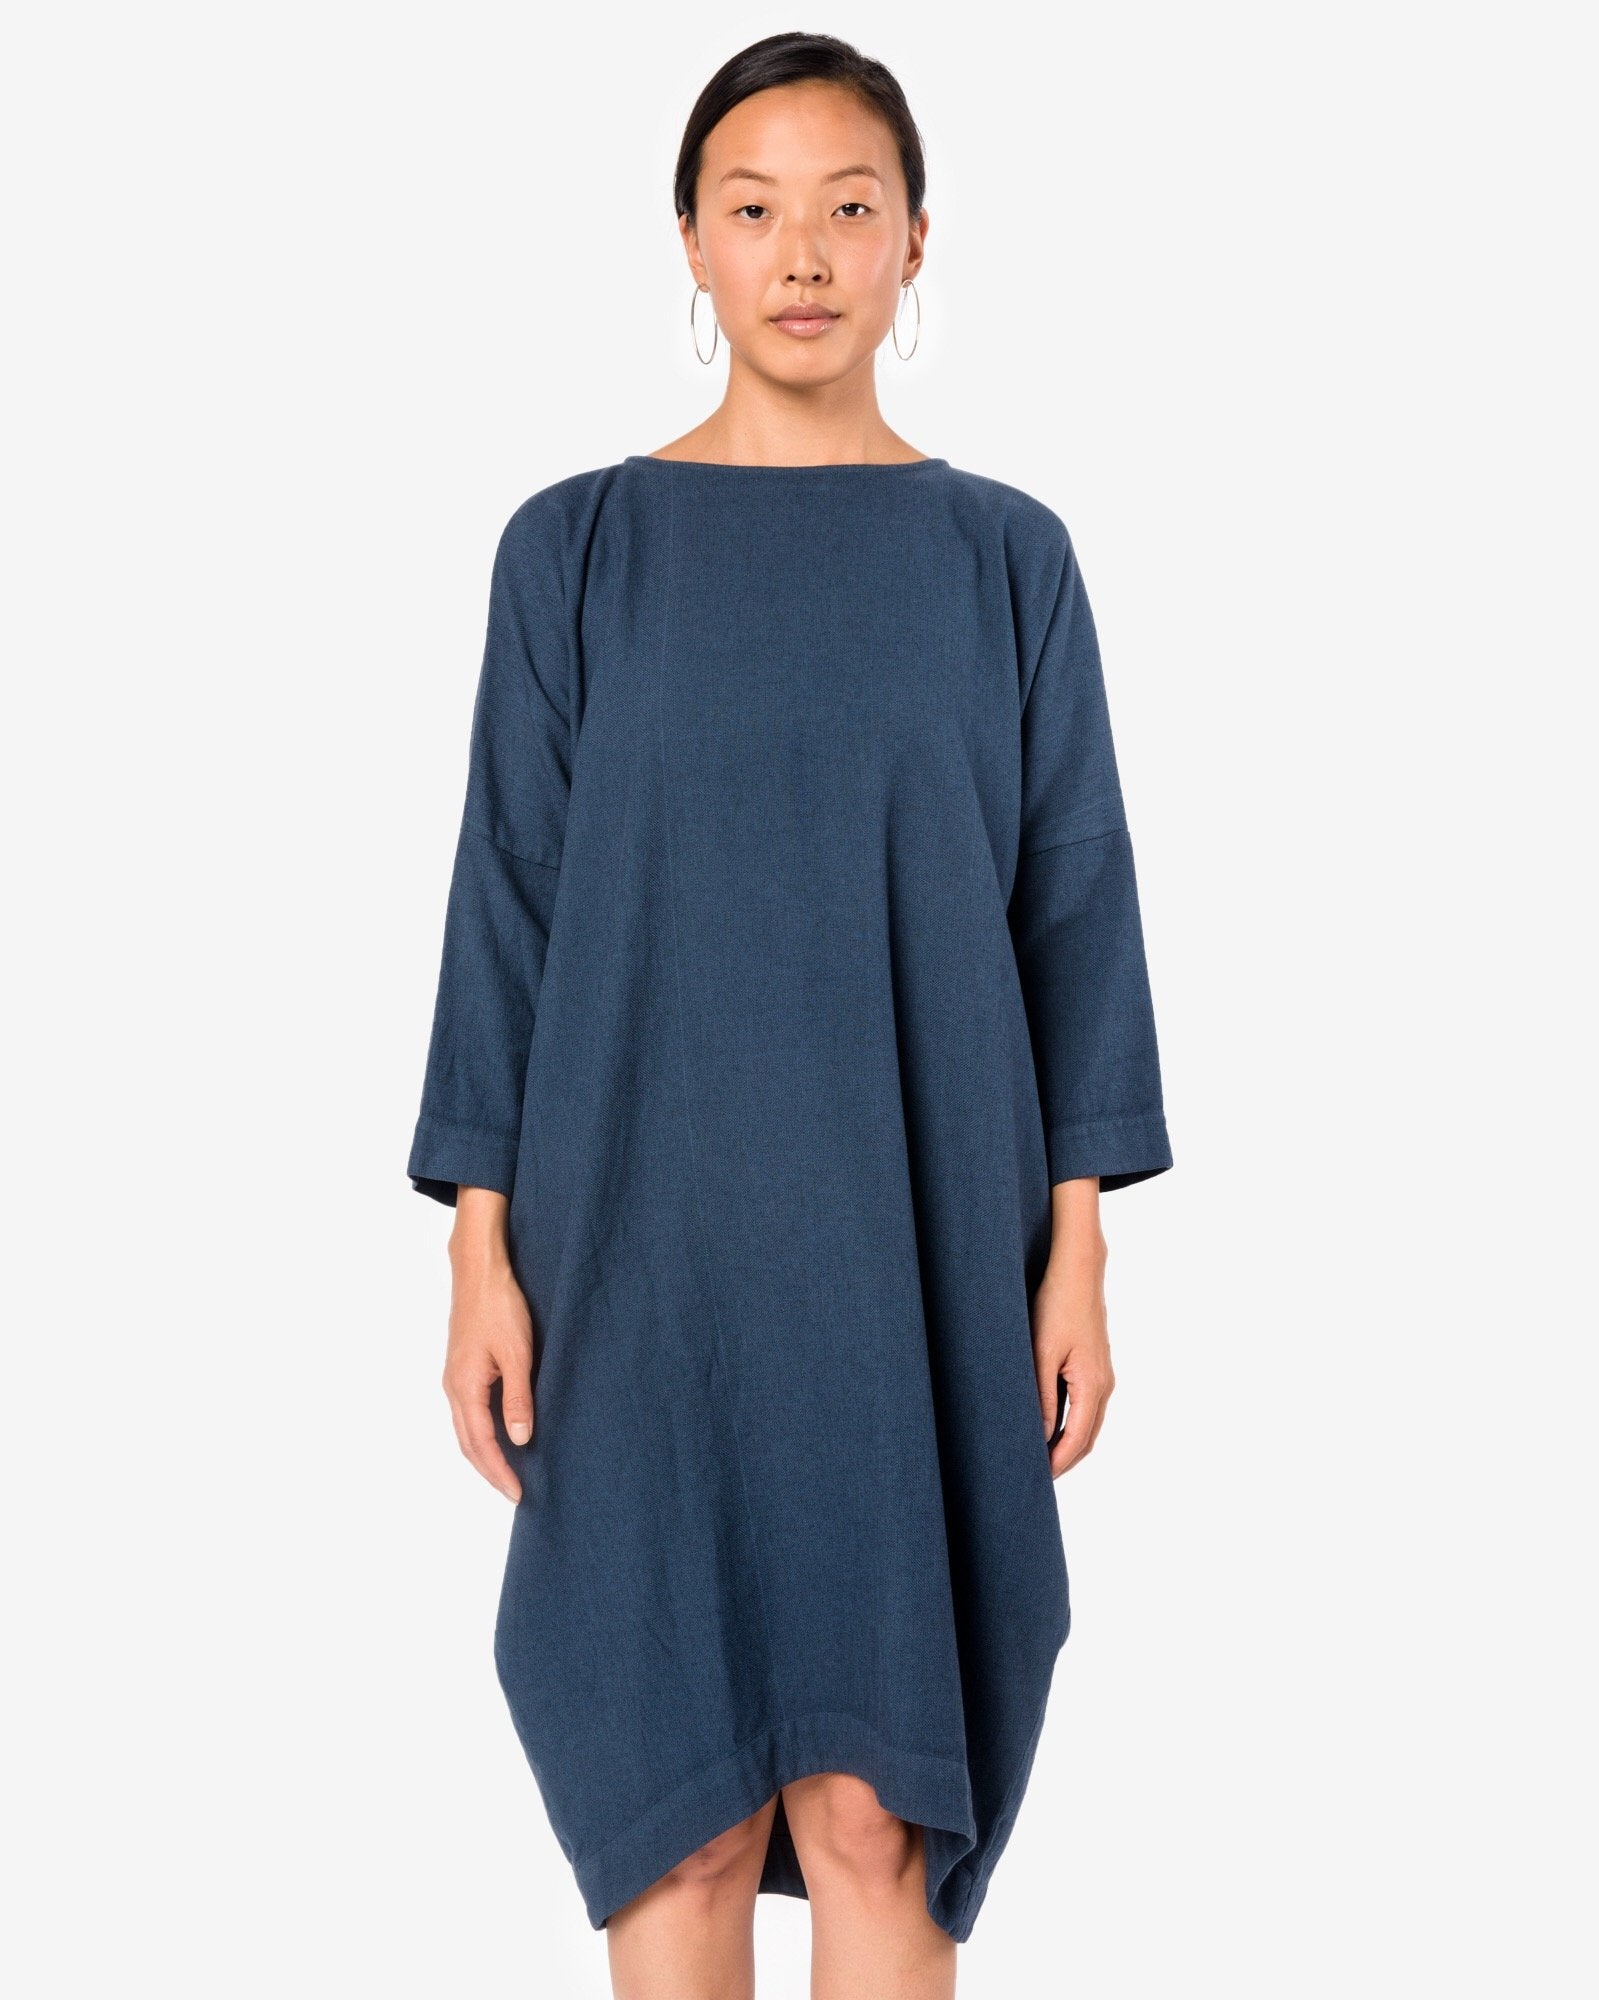 Bud Dress in Midnight by Black Crane at Mohawk General Store